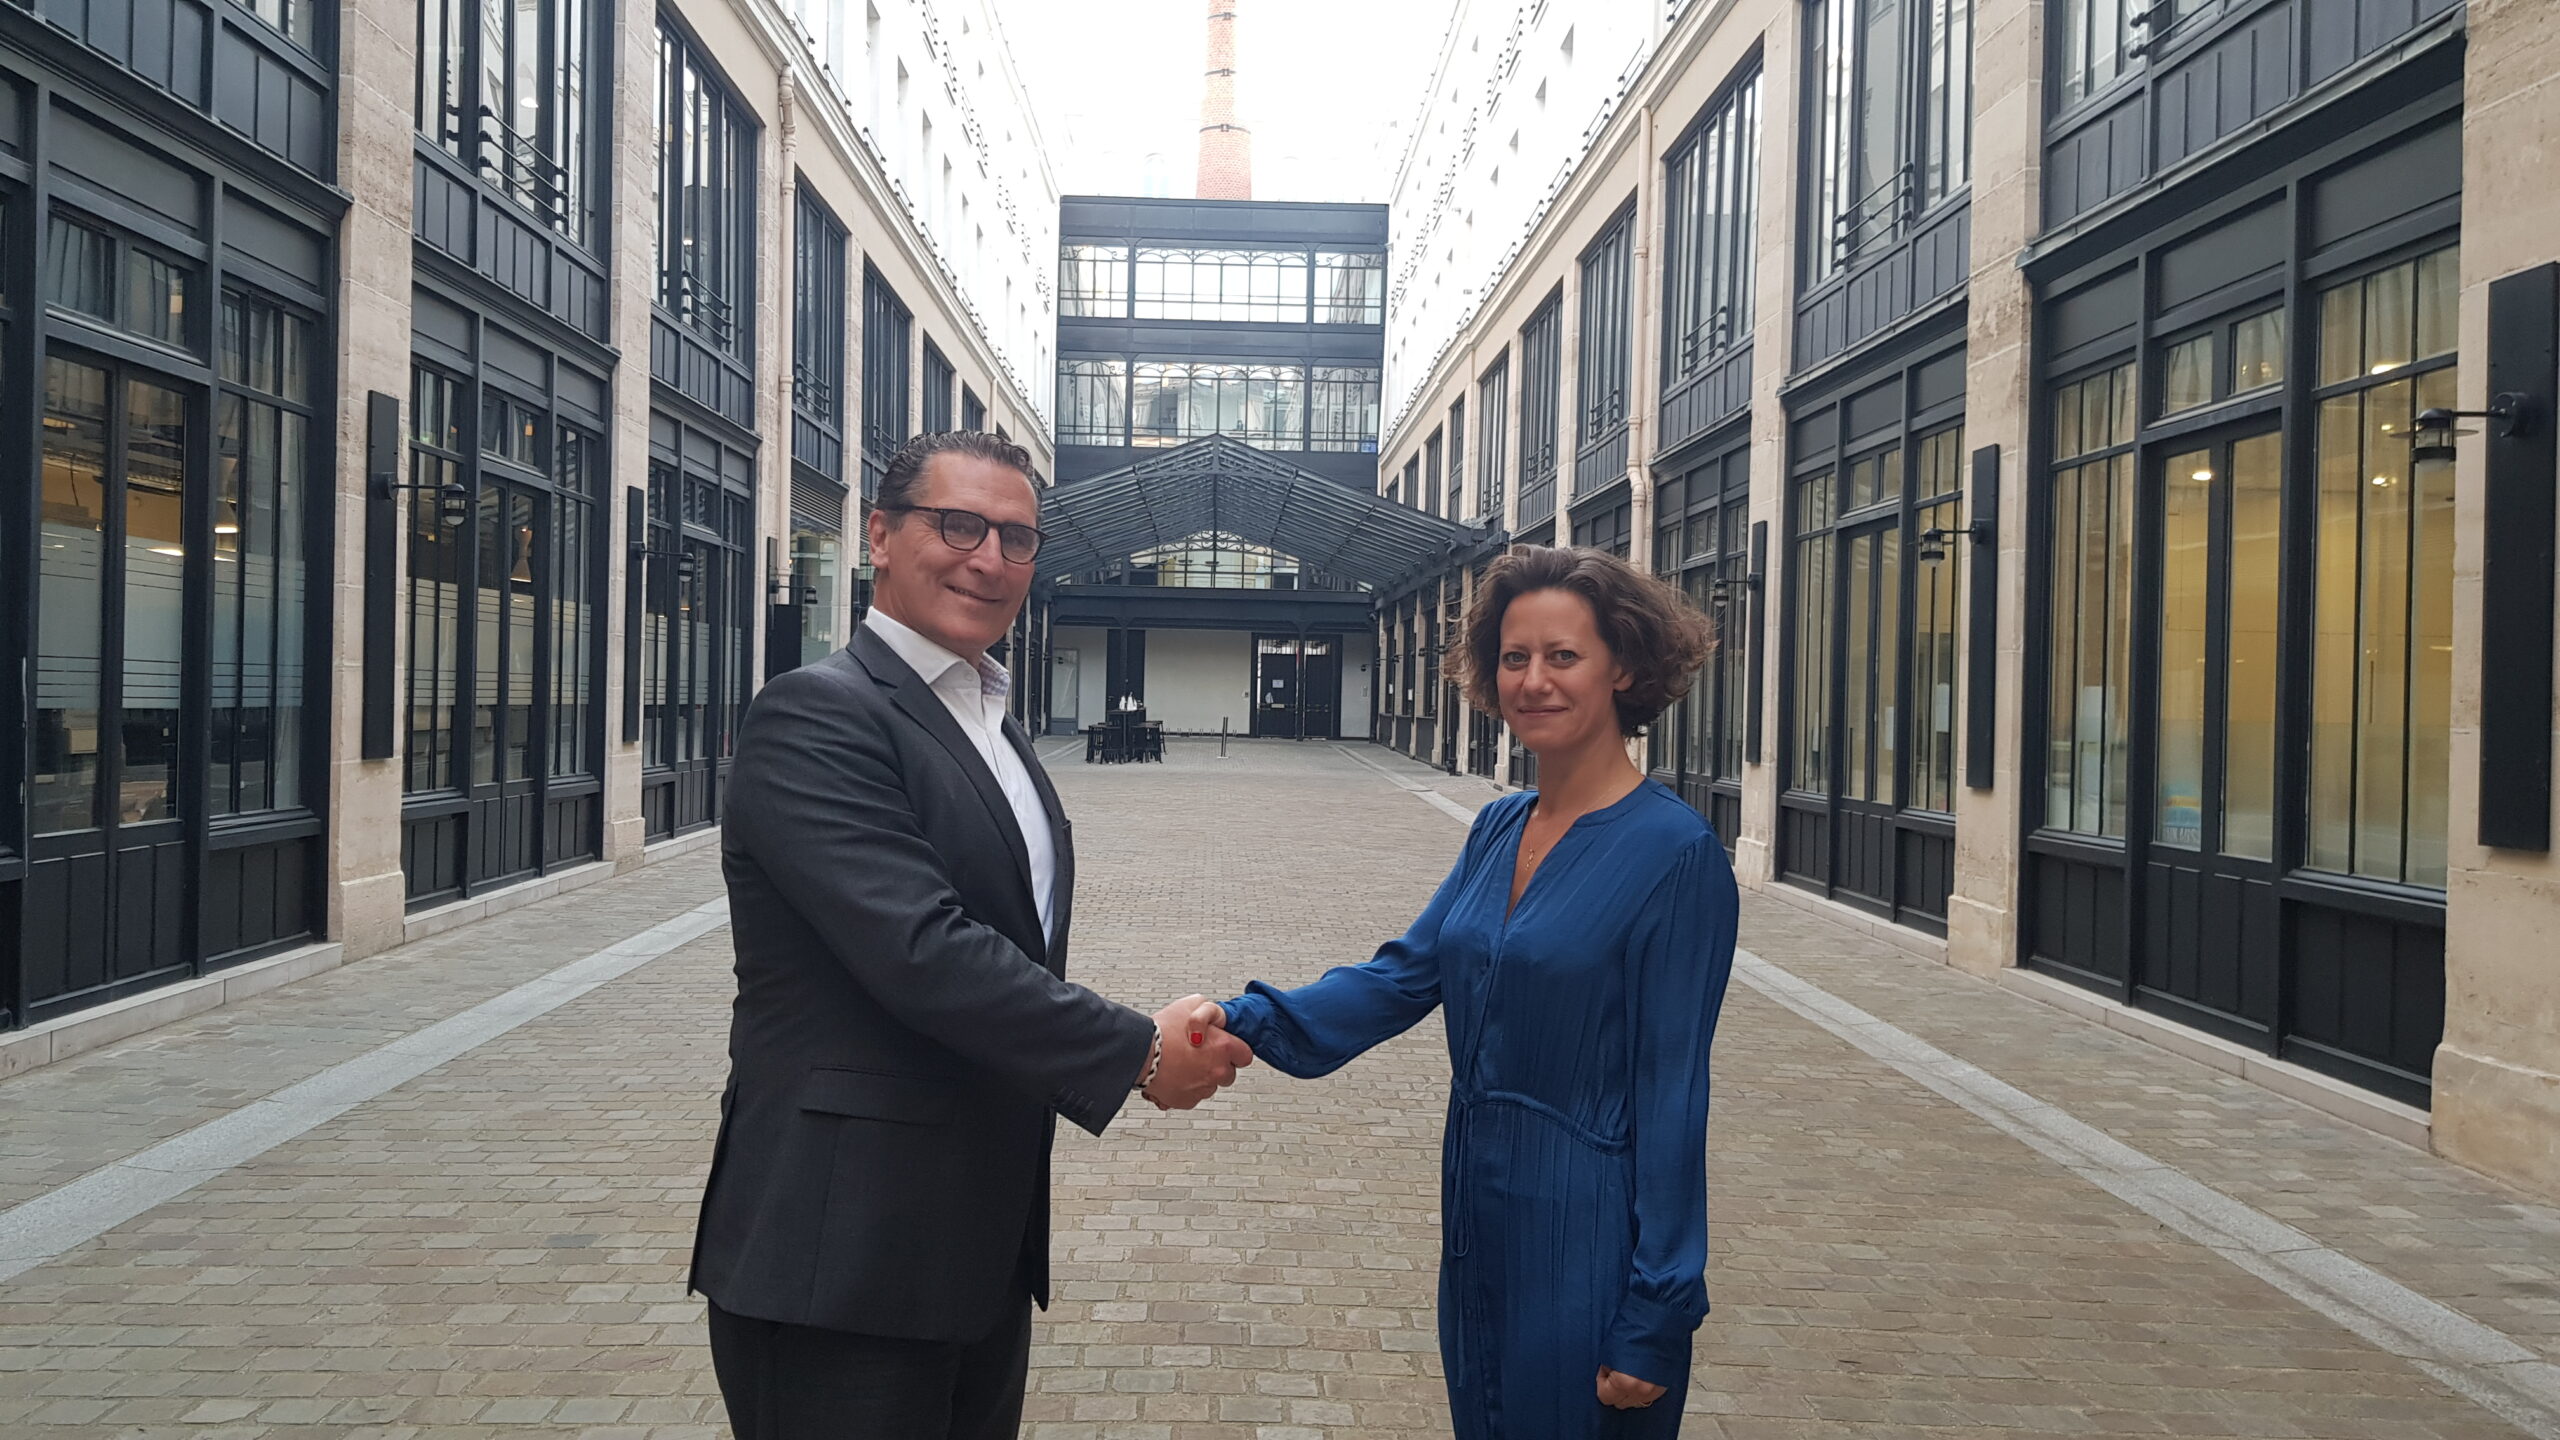 Kurt Herpel, CEO of Delta4, and Revital Rattenbach, CEO of 4P-Pharma, celebrating the signature of a partnership agreement between Delta4 and 4P-Pharma in Paris (France).